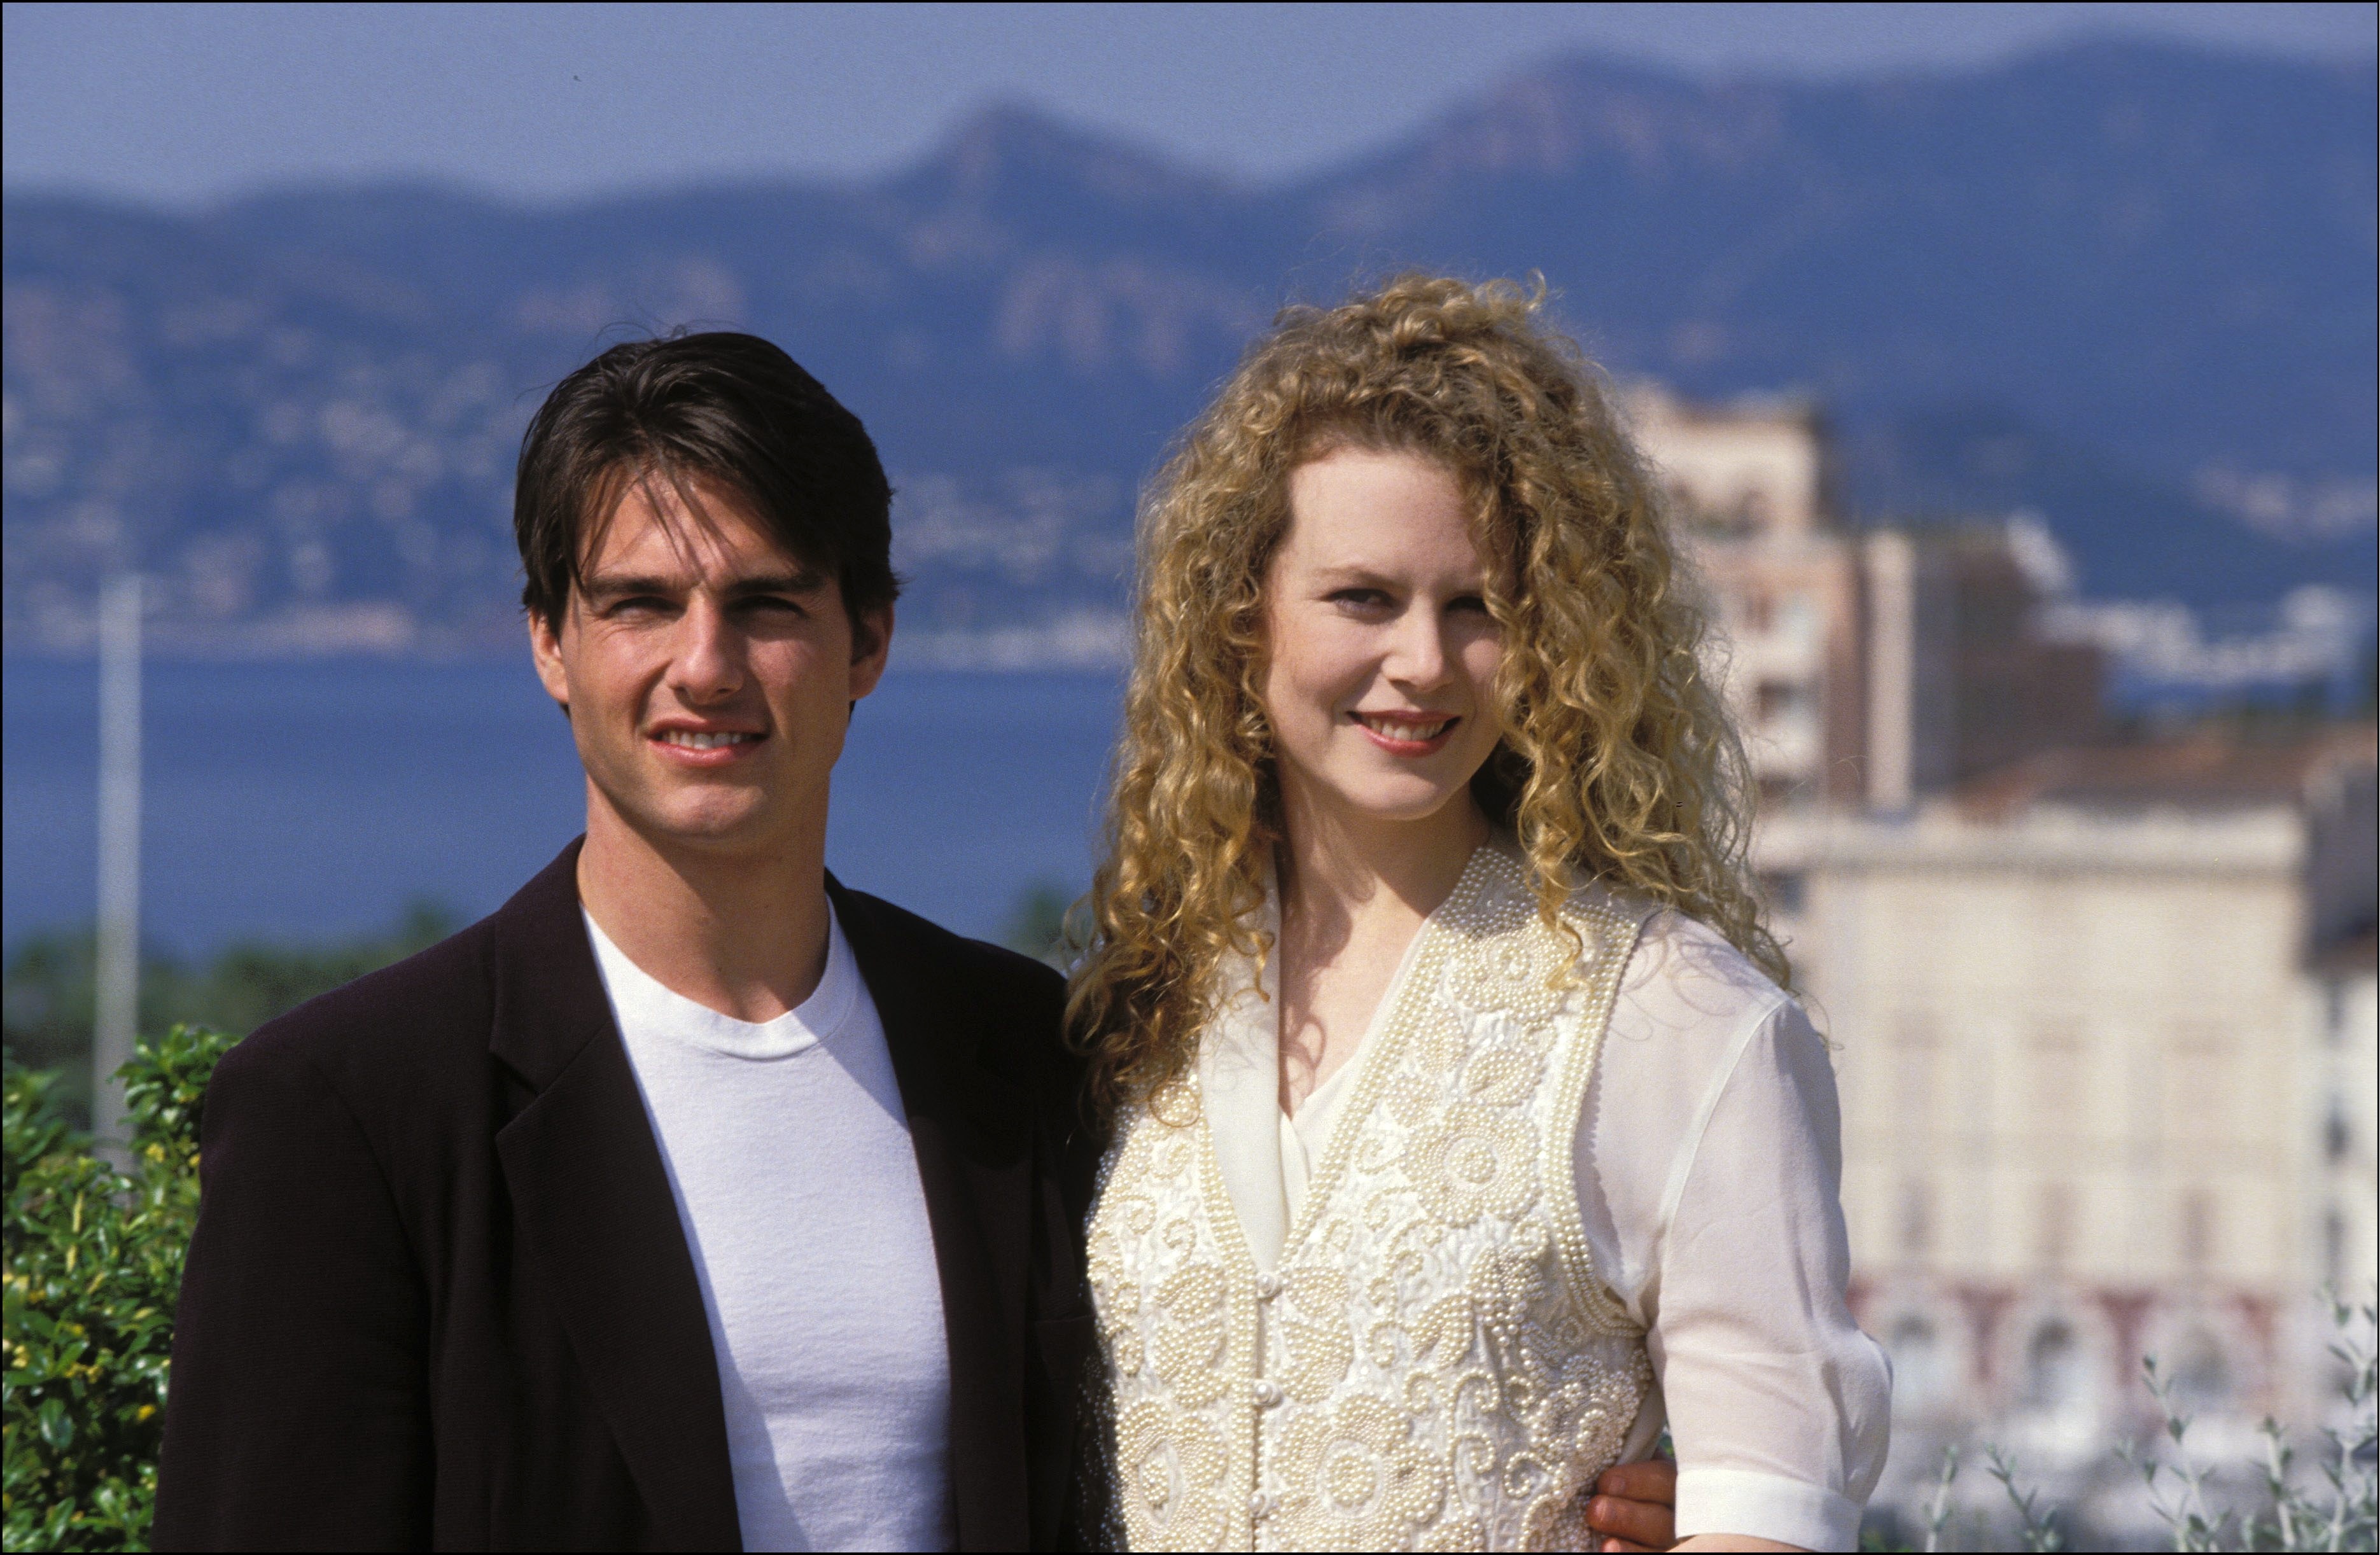 Tom Cruise and Nicole Kidman on May 17, 1992, in Cannes, France. | Source: Getty Images